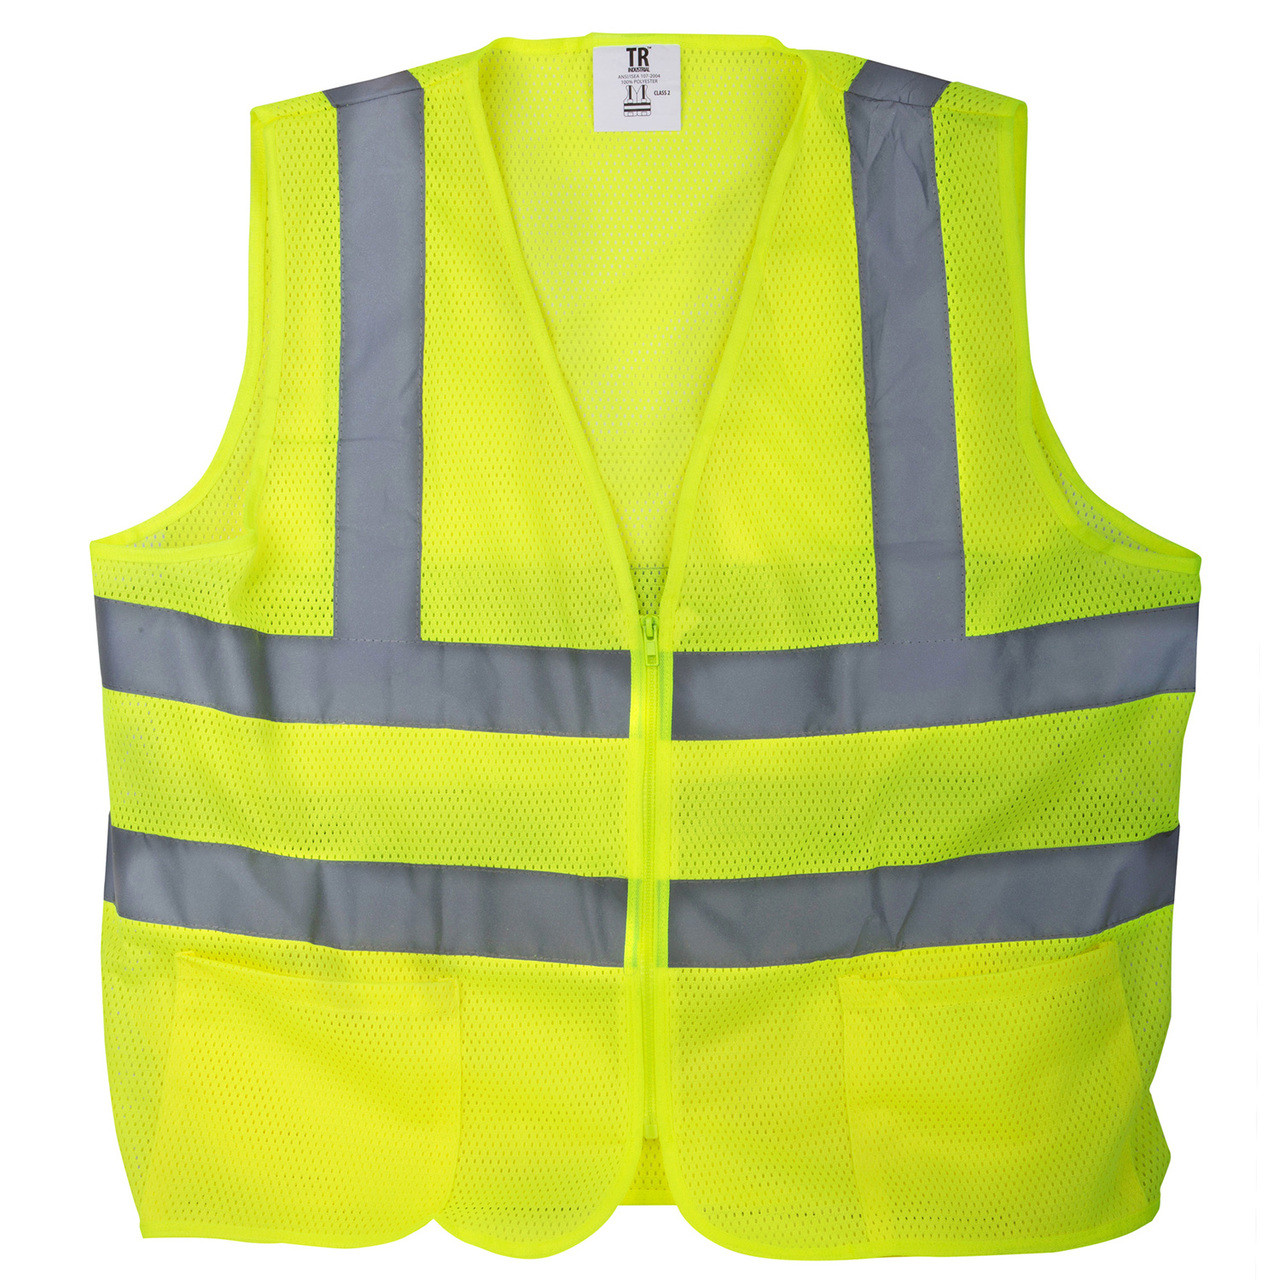 TR Industrial Neon Yellow High Visibility Front Zipper Mesh Safety Vest, Size XXL, Pack of 5